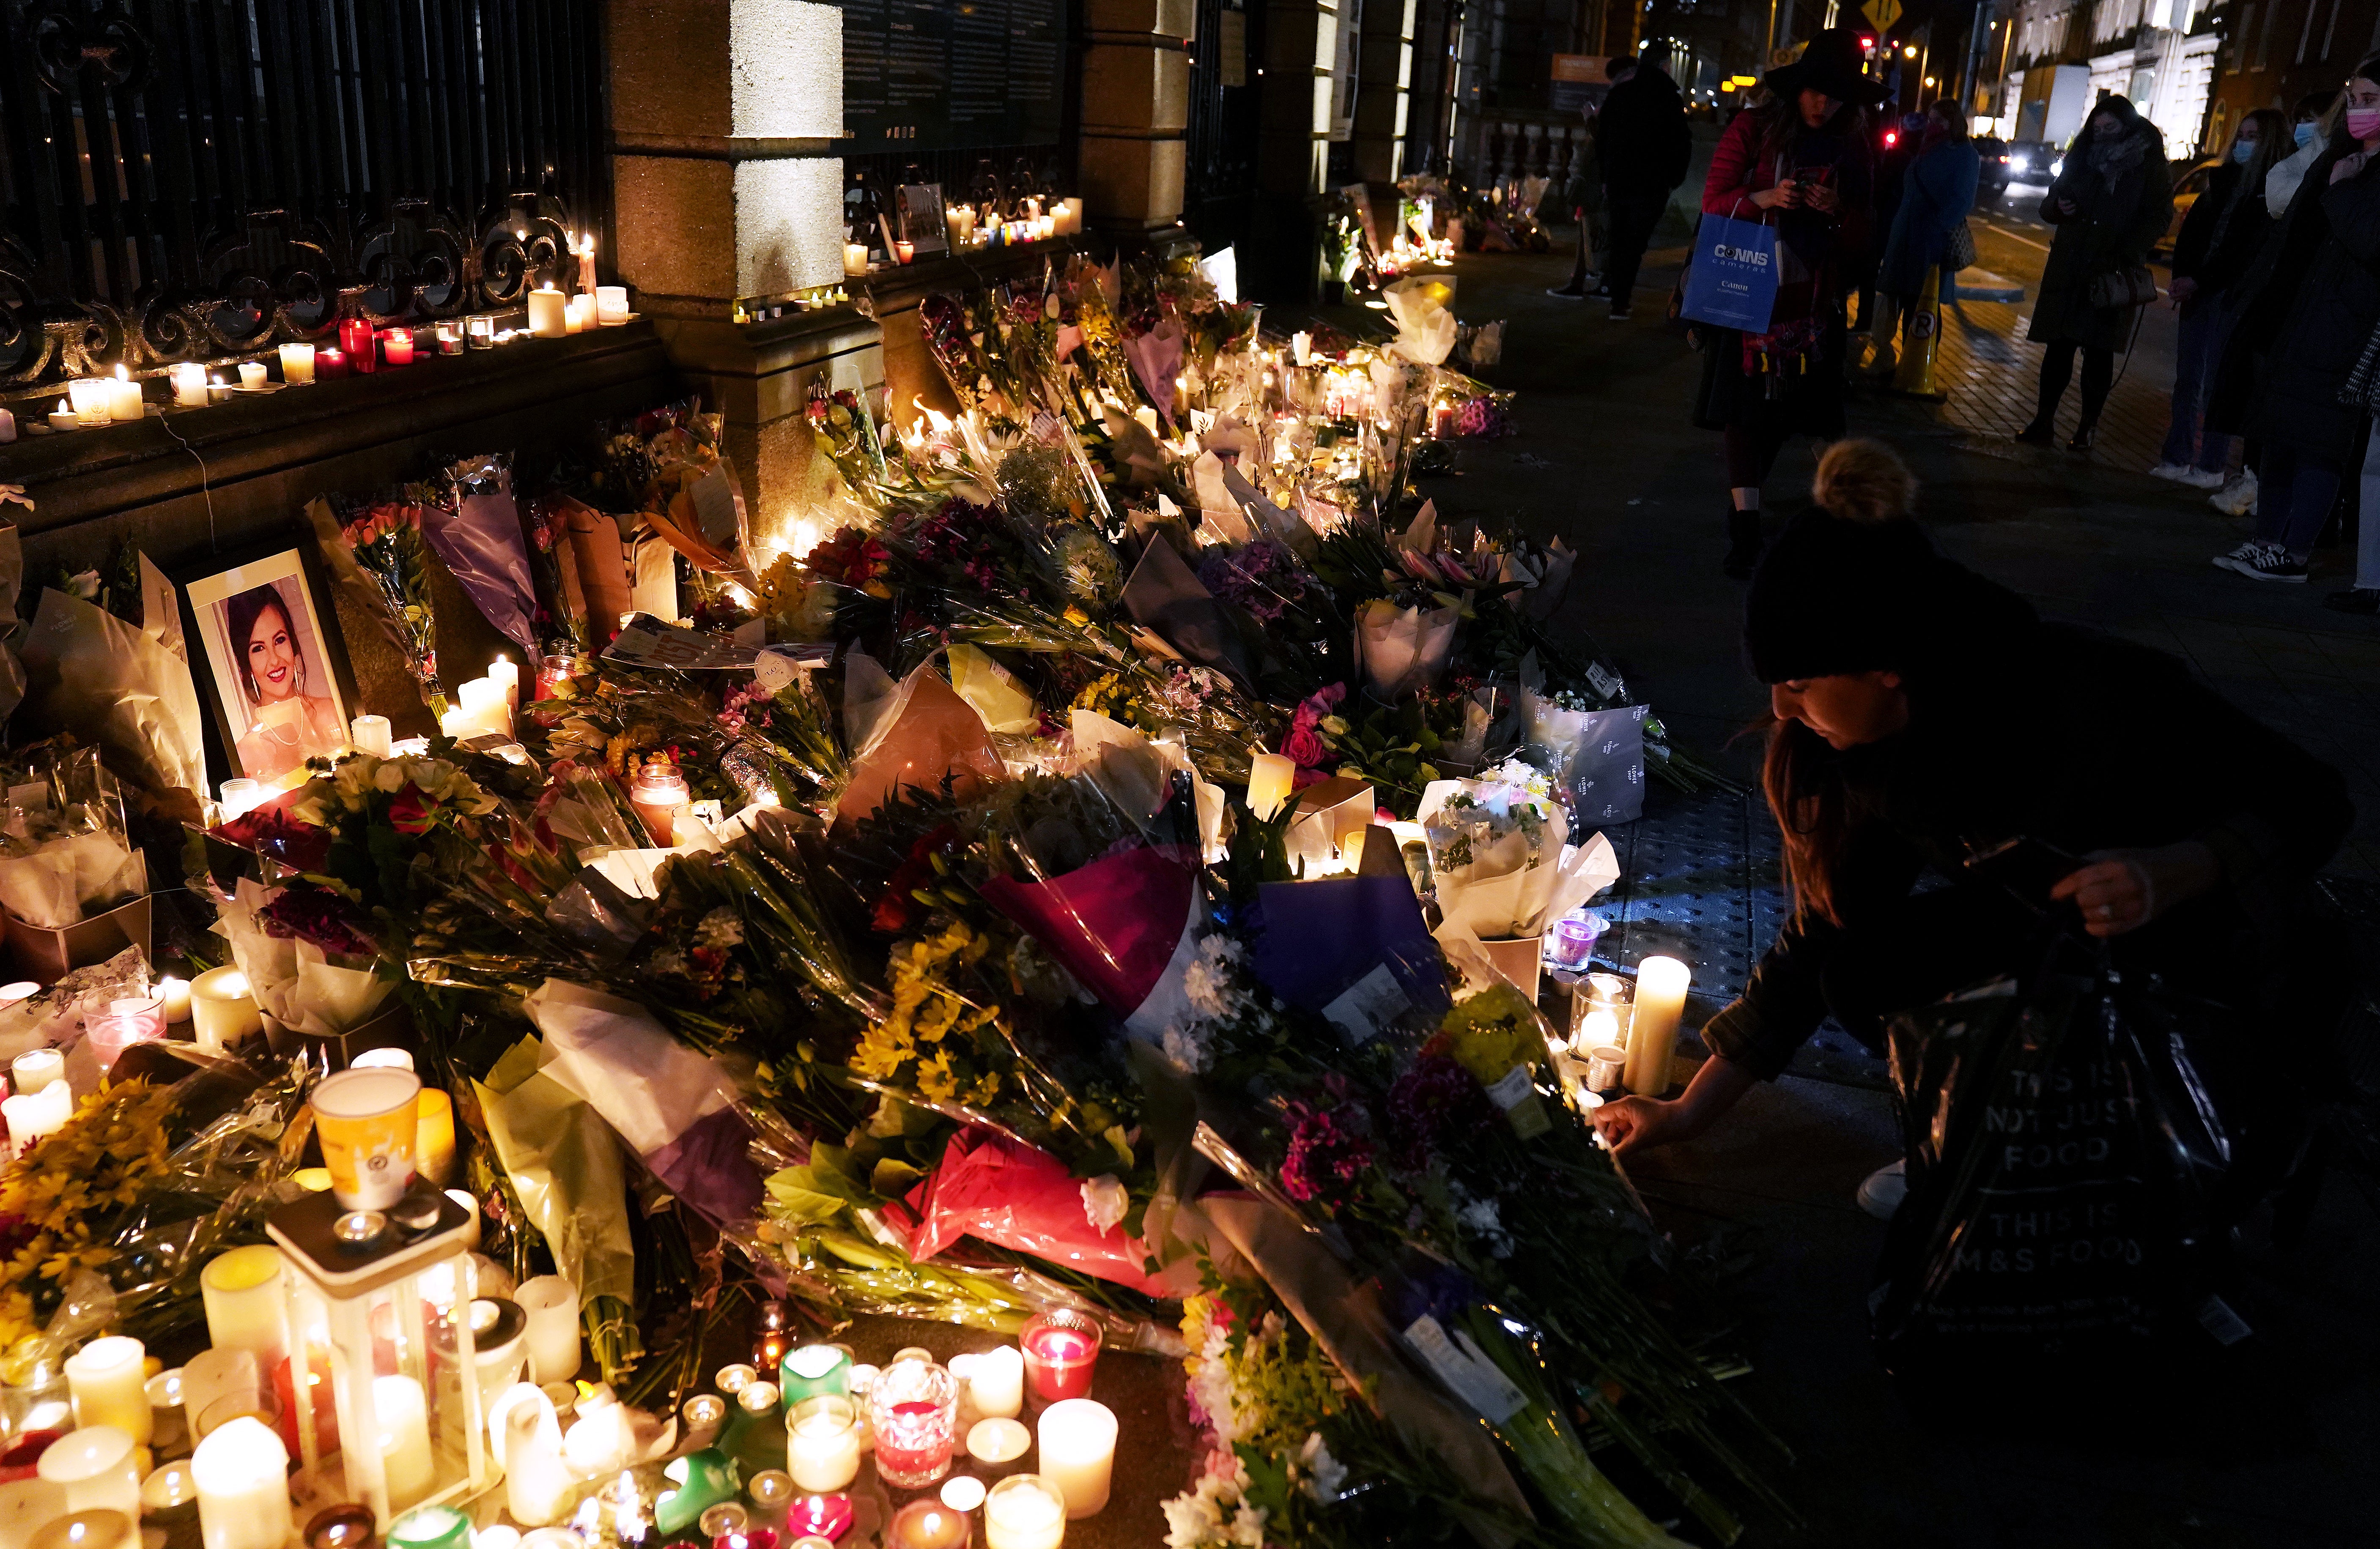 People leave candles and flowers at a make-shift shrine during a vigil at Leinster House, Dublin, for the murdered Ashling Murphy who died after being attacked while she was jogging along the Grand Canal in Tullamore, County Offaly, on Wednesday (Brian Lawless/PA)